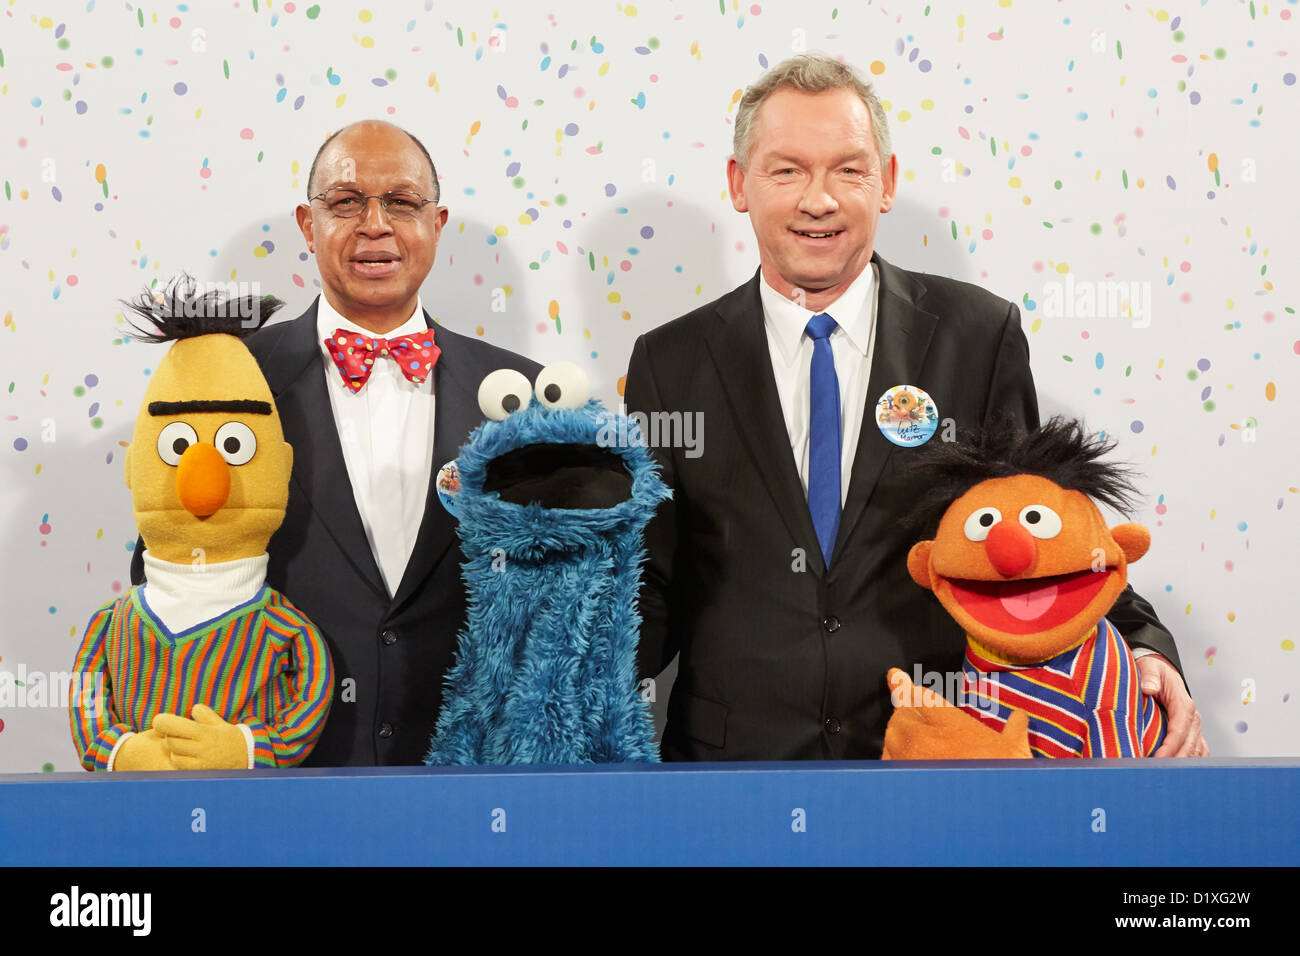 Sesame Street Muppet Bert (L-R), Melvin Ming, Sesame Workshop President and CEO, Cookie Monster, NDR intendant Lutz Marmor and Ernie pose for photographs during a press conference on the 40th anniversary of the Sesame Street in Hamburg, Germany, 07 January 2013. On 8 January 1973, the children's television series Sesame Street premiered in Germany. Photo: GEORG WENDT Stock Photo